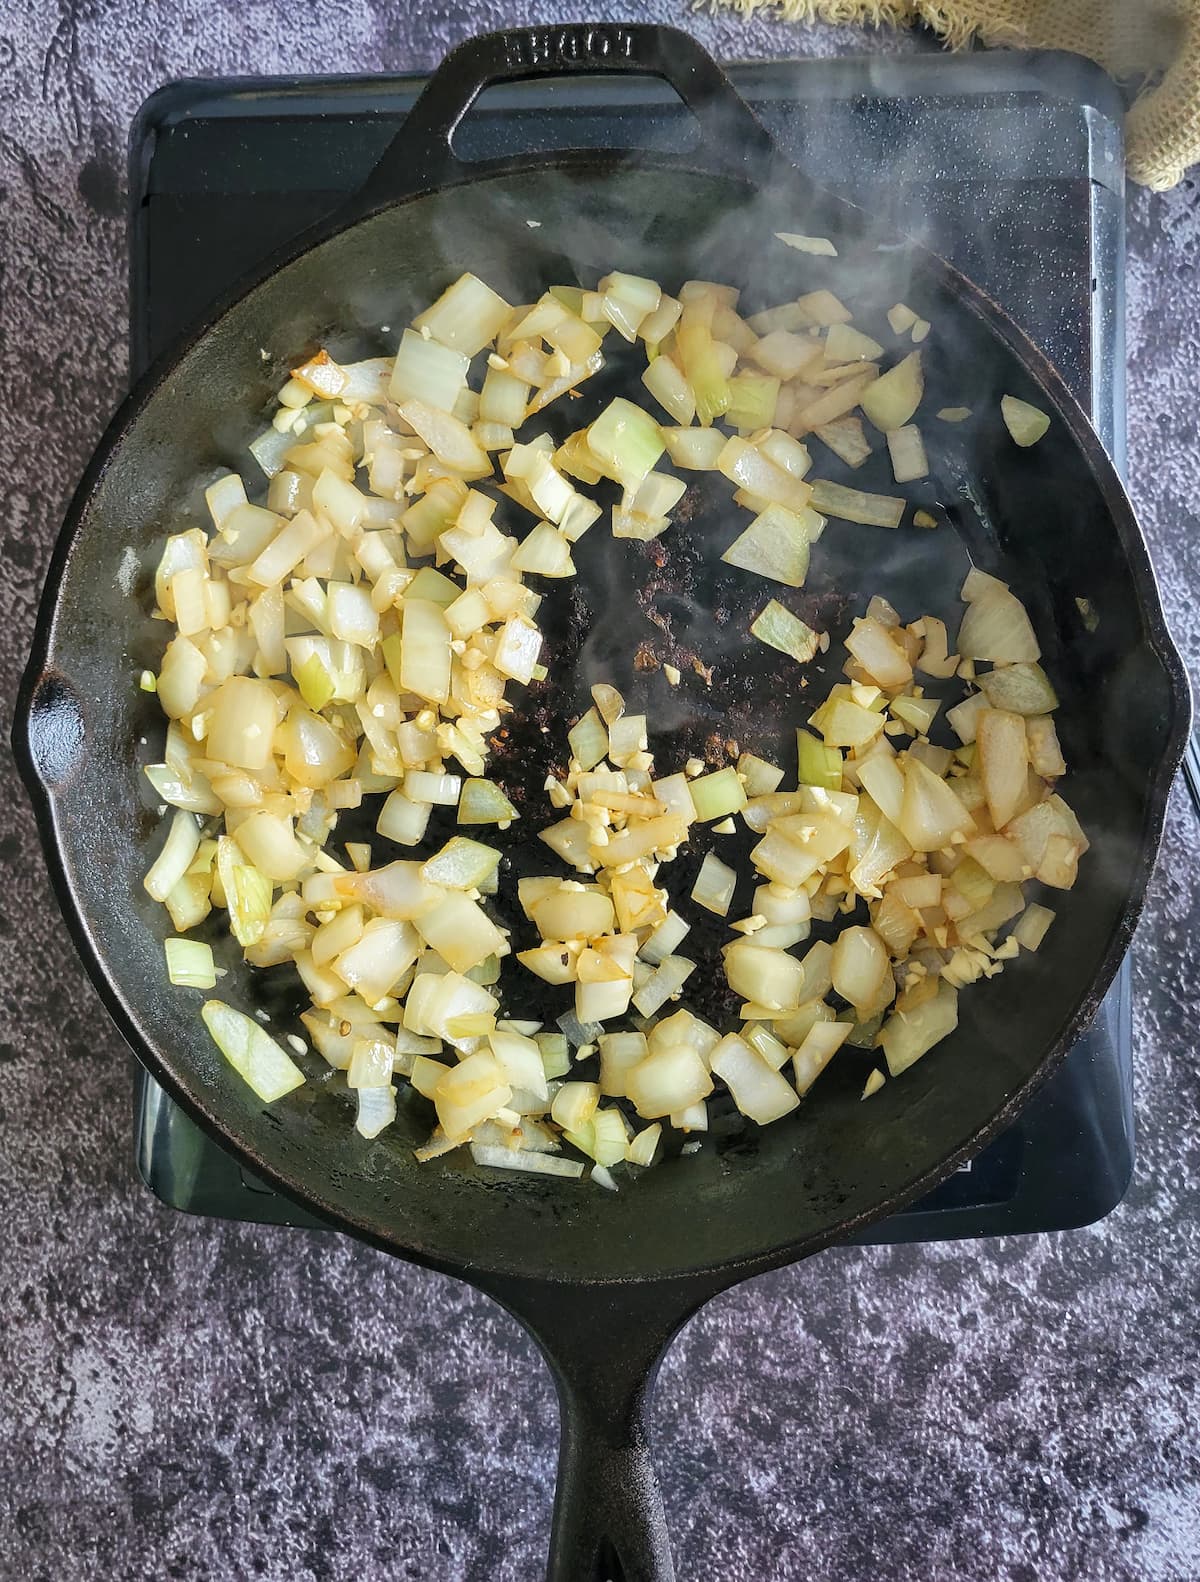 diced onions and minced garlic in a cast iron skillet on a burner